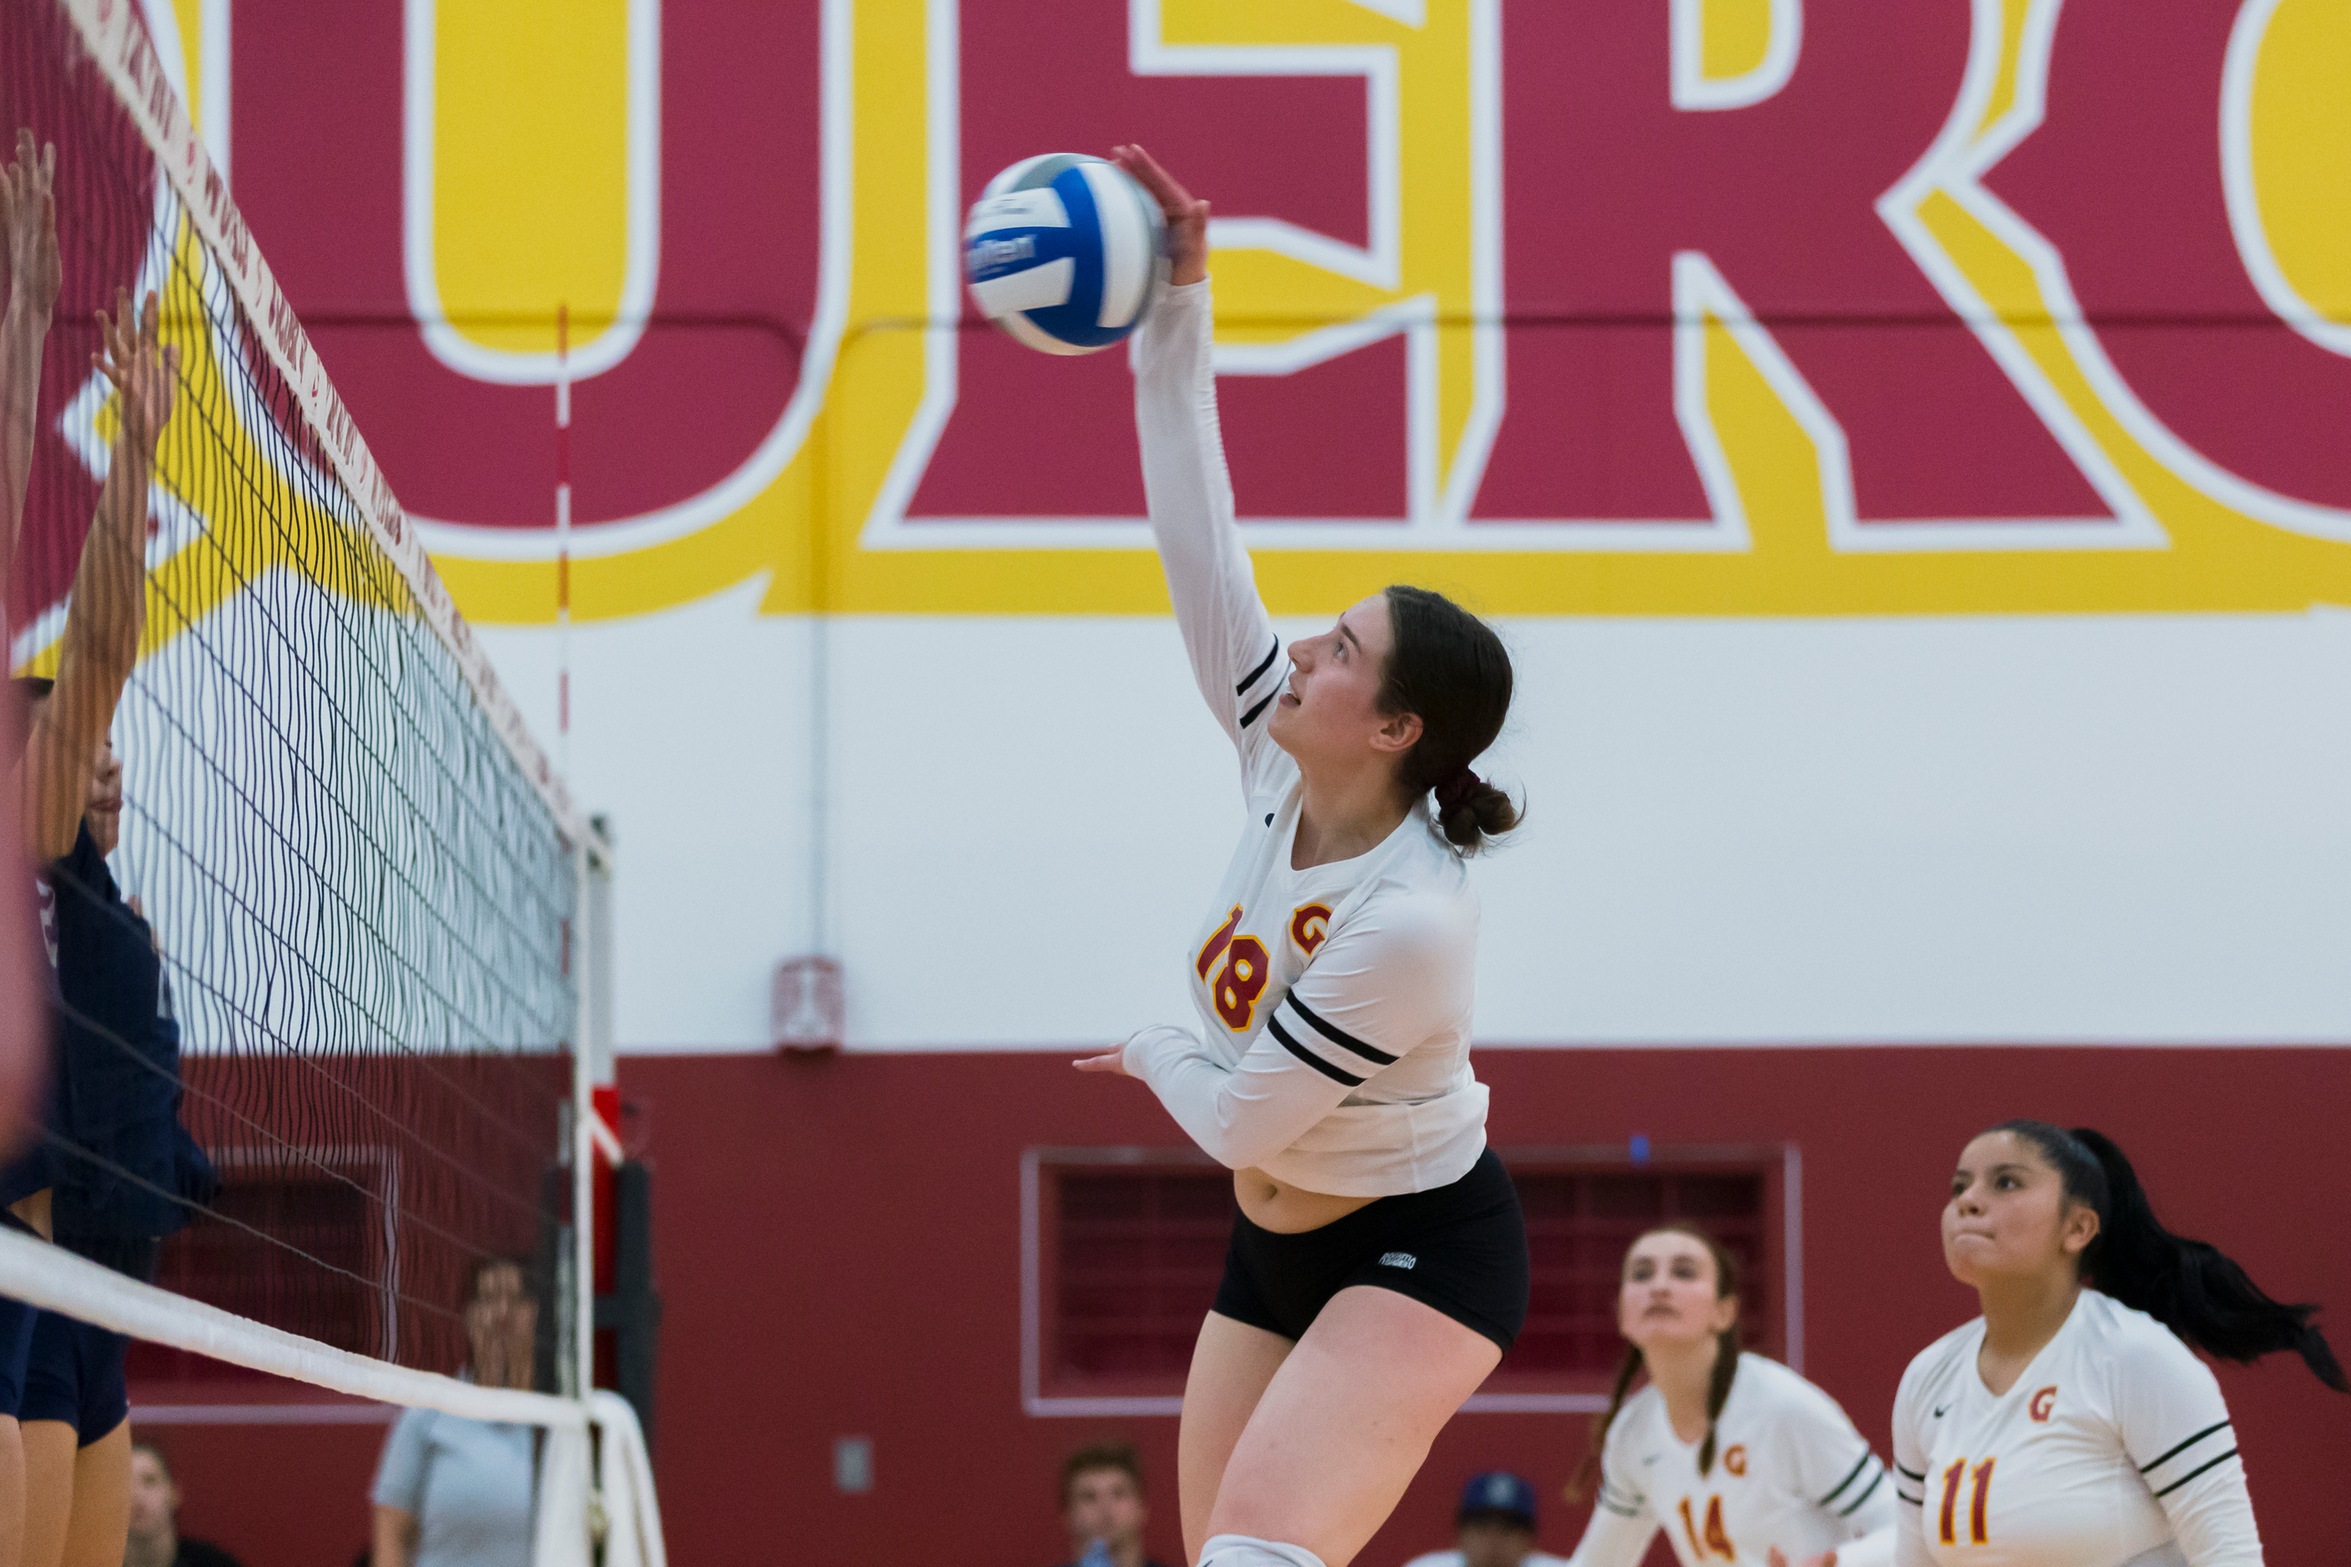 GCC Women's Volleyball falls to L.A. Mission 3-0 Sept. 23; Starts WSC play this week